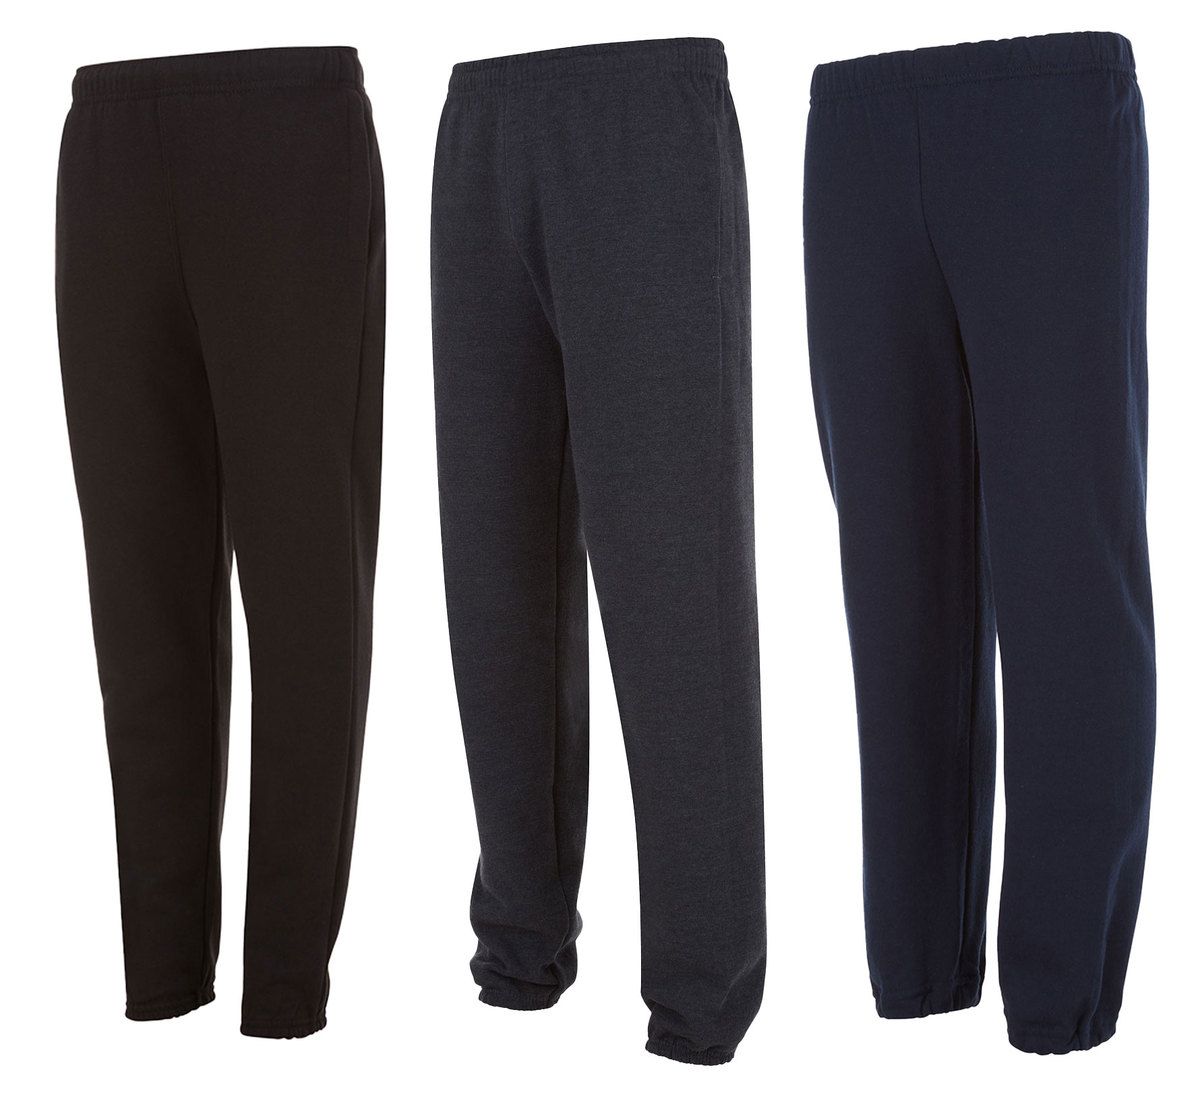 Athletic Works Boys Active Fleece Pants, 4-Pack, Sizes 4-18, 58% OFF